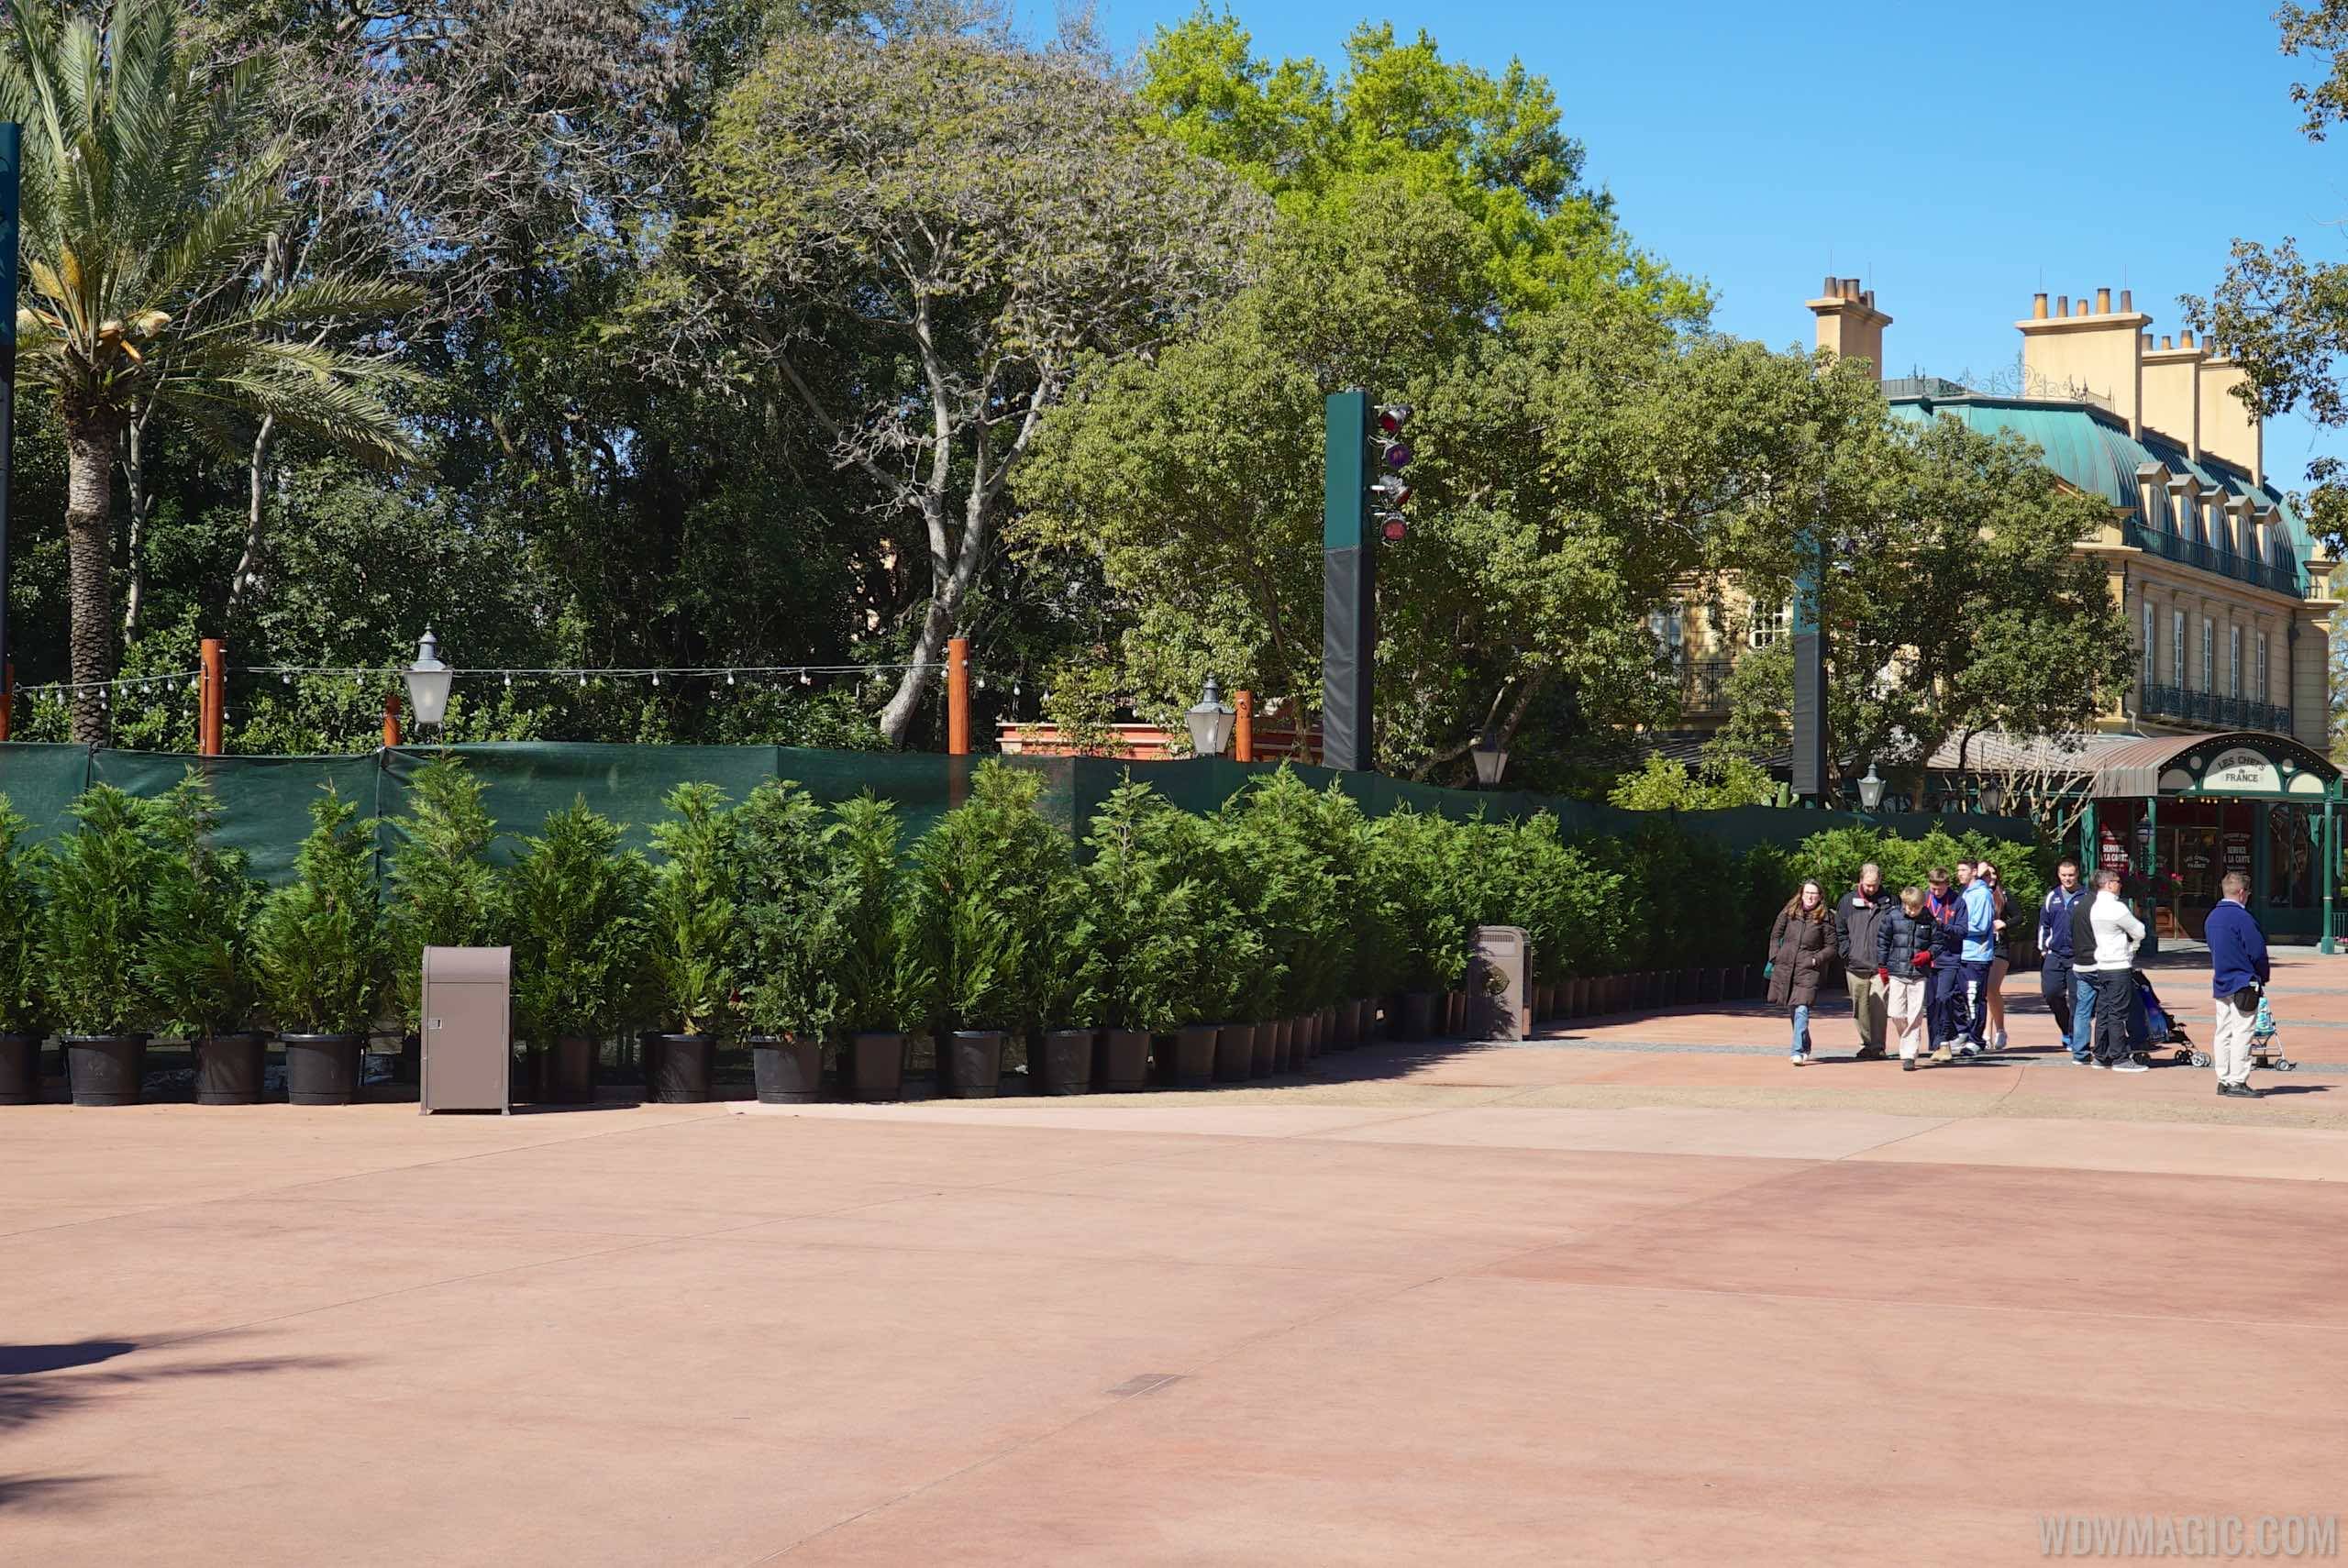 PHOTOS - Topiary and Outdoor Kitchens now being put in place ahead of the 2015 Epcot International Flower and Garden Festival